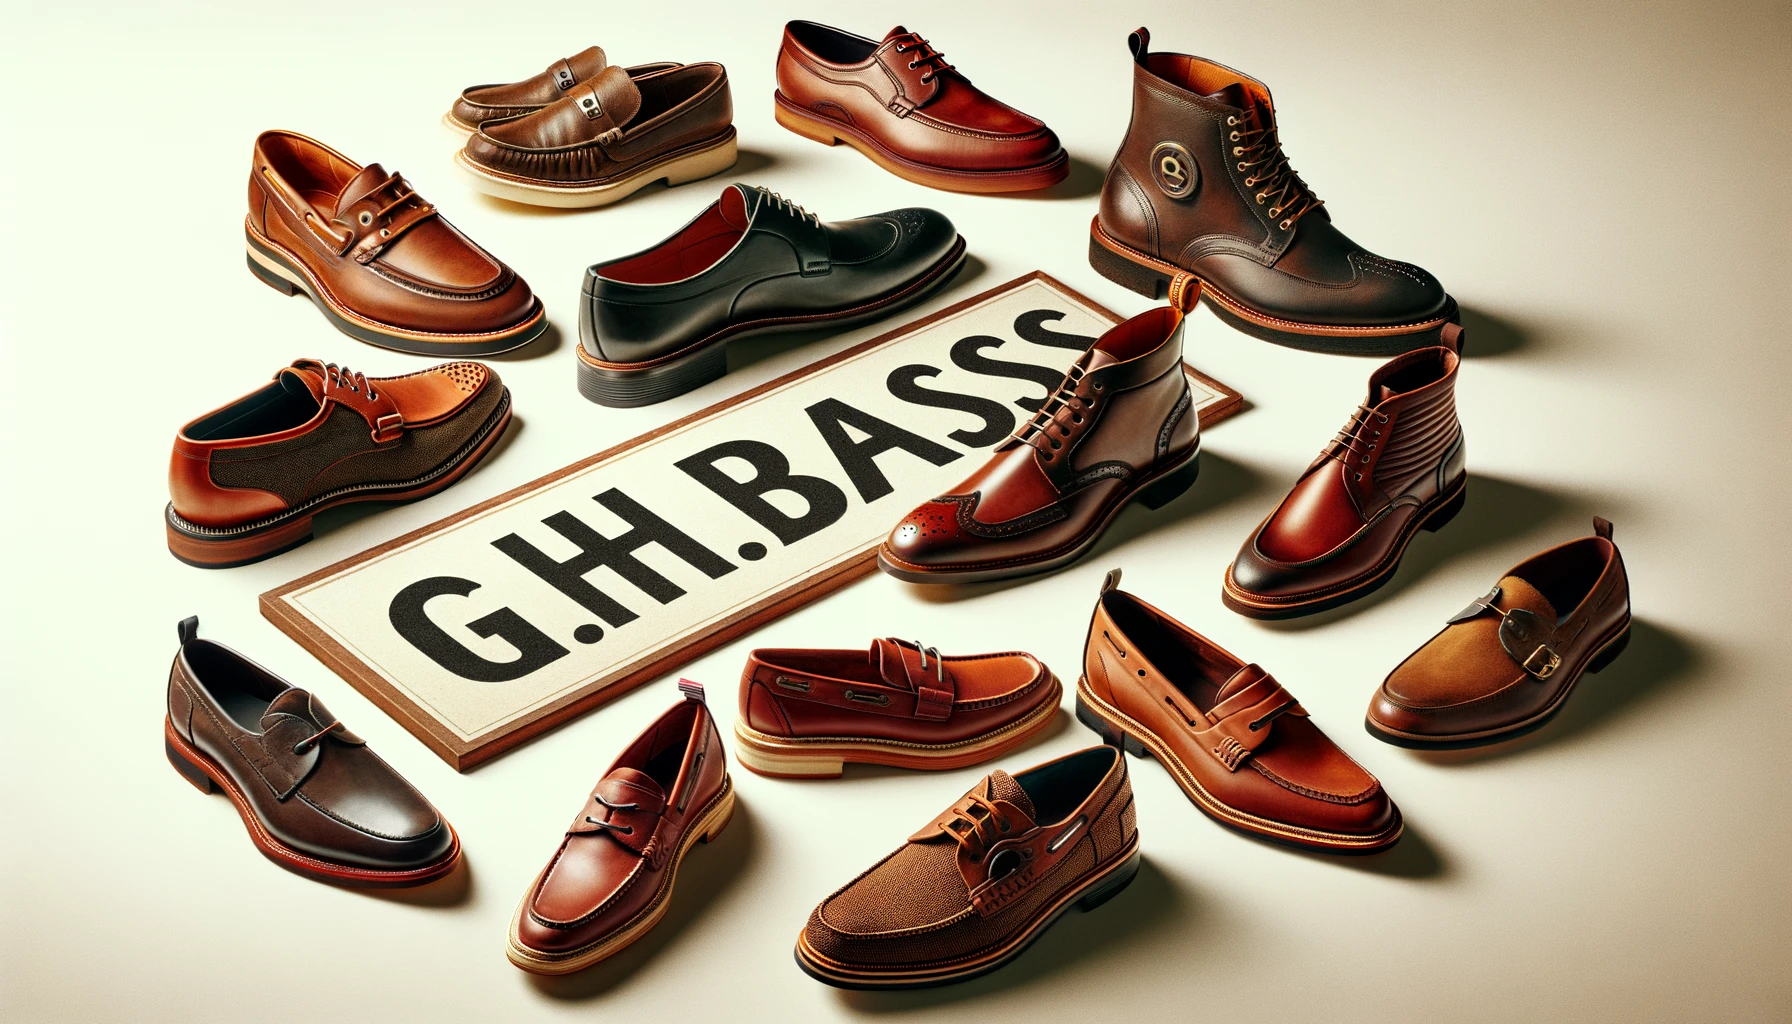 A collection of different G.H.BASS leather shoe models arranged in a stylish manner. The image showcases various designs, including loafers, oxfords, and boots, highlighting the diversity in styles. The background is minimalist, drawing attention to the quality and details of each shoe model. Include the text 'G.H.BASS' prominently in the image.